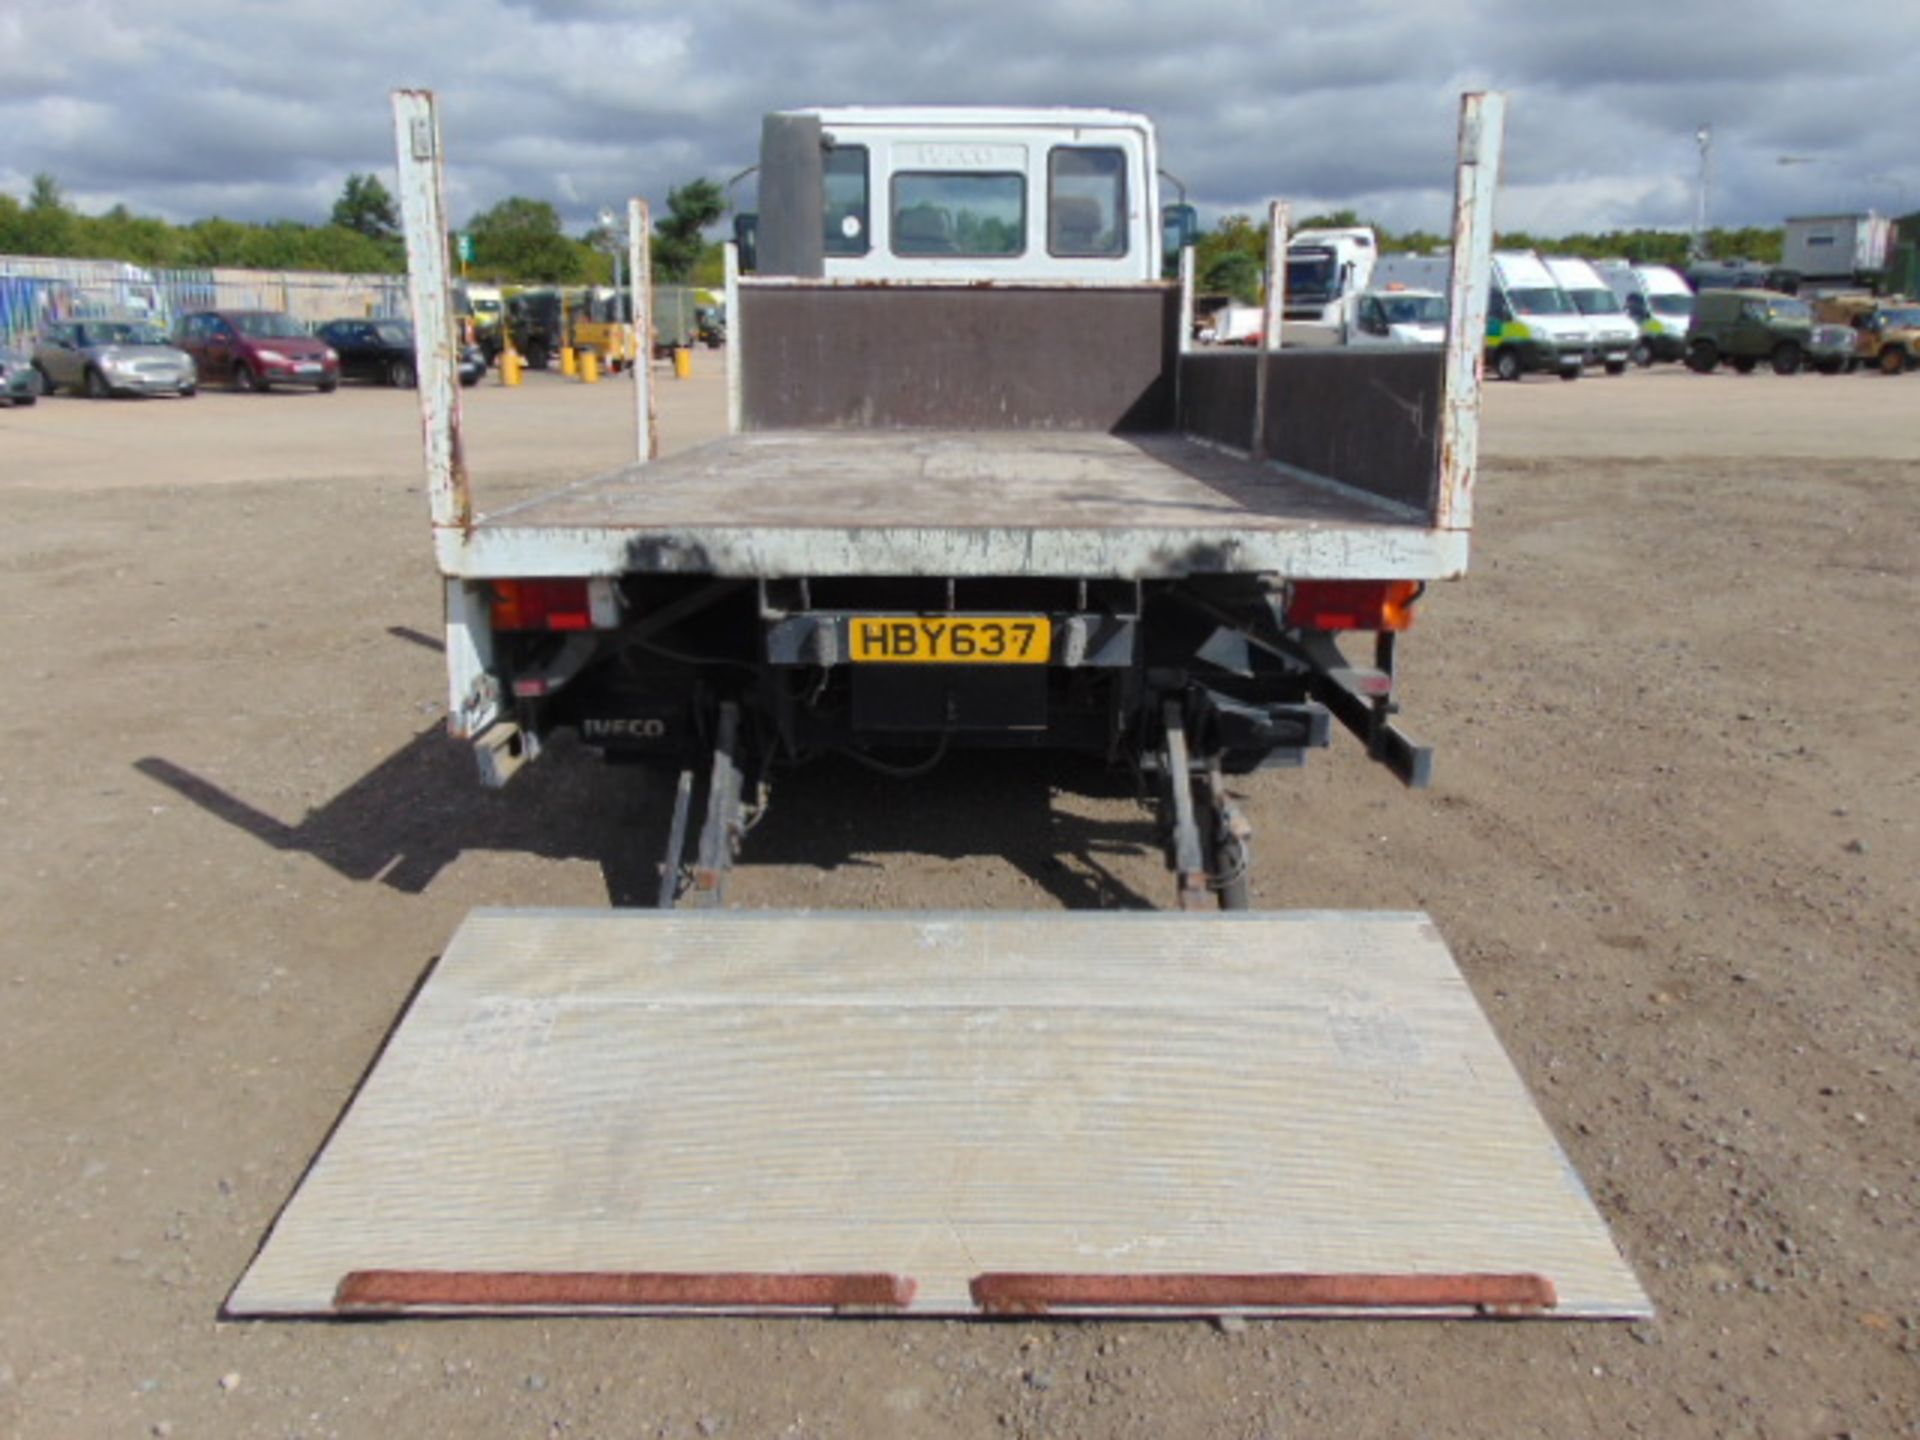 Ford Iveco Cargo 75E14 Complete with Rear Tail Lift - Image 12 of 22